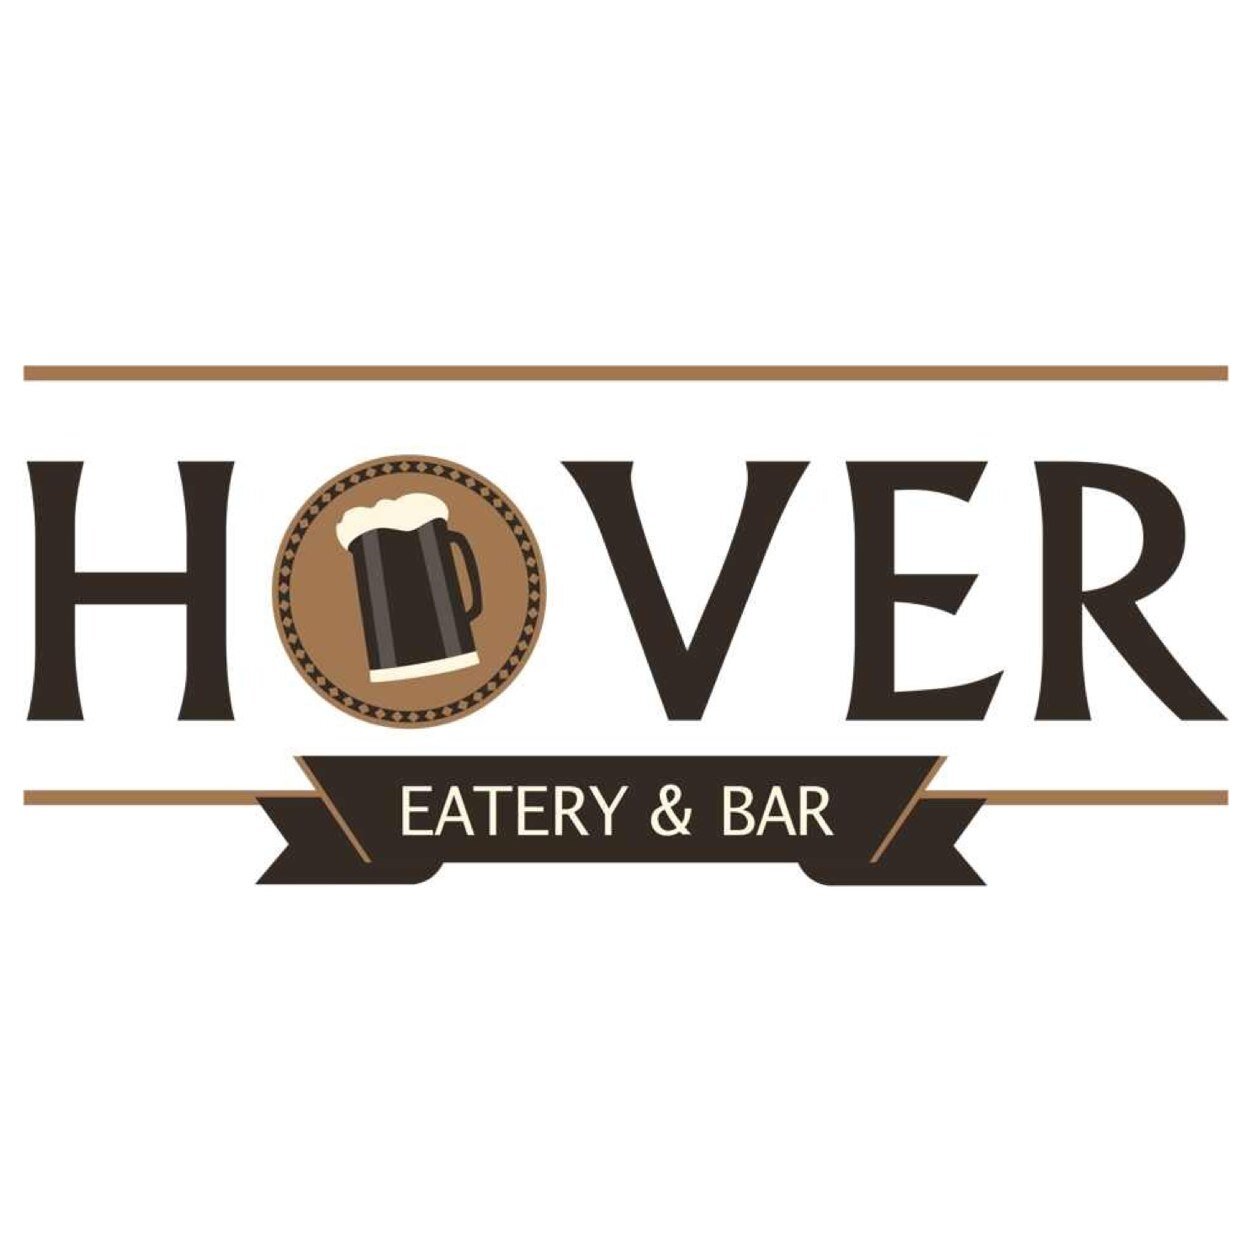 HOVER eatery&bar Profile